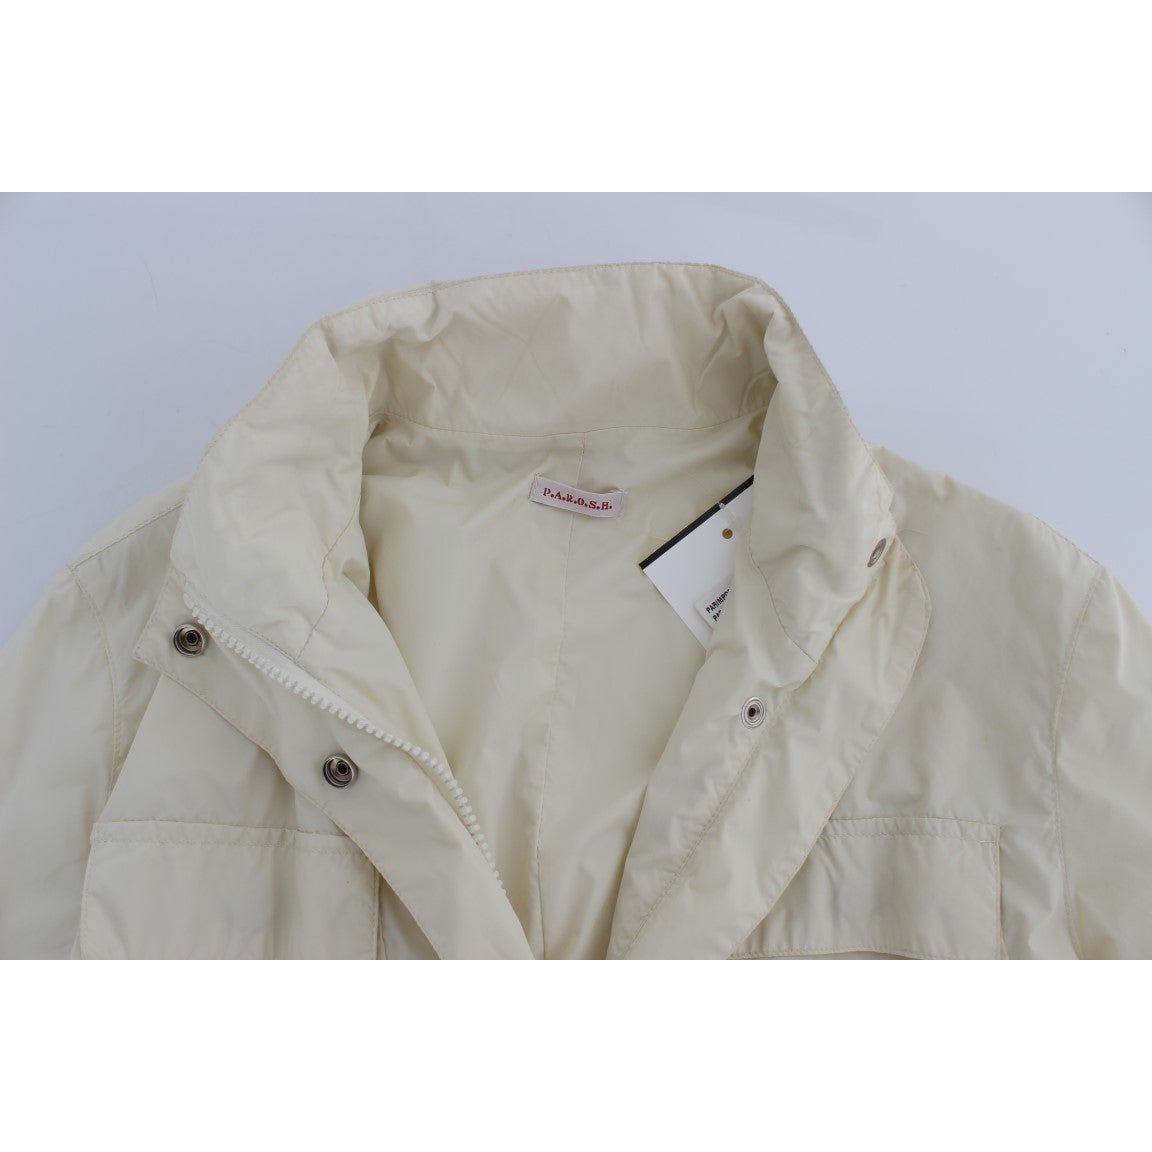 P.A.R.O.S.H. Chic Beige Trench Jacket Coat Coats & Jackets beige-weather-proof-trench-jacket-coat